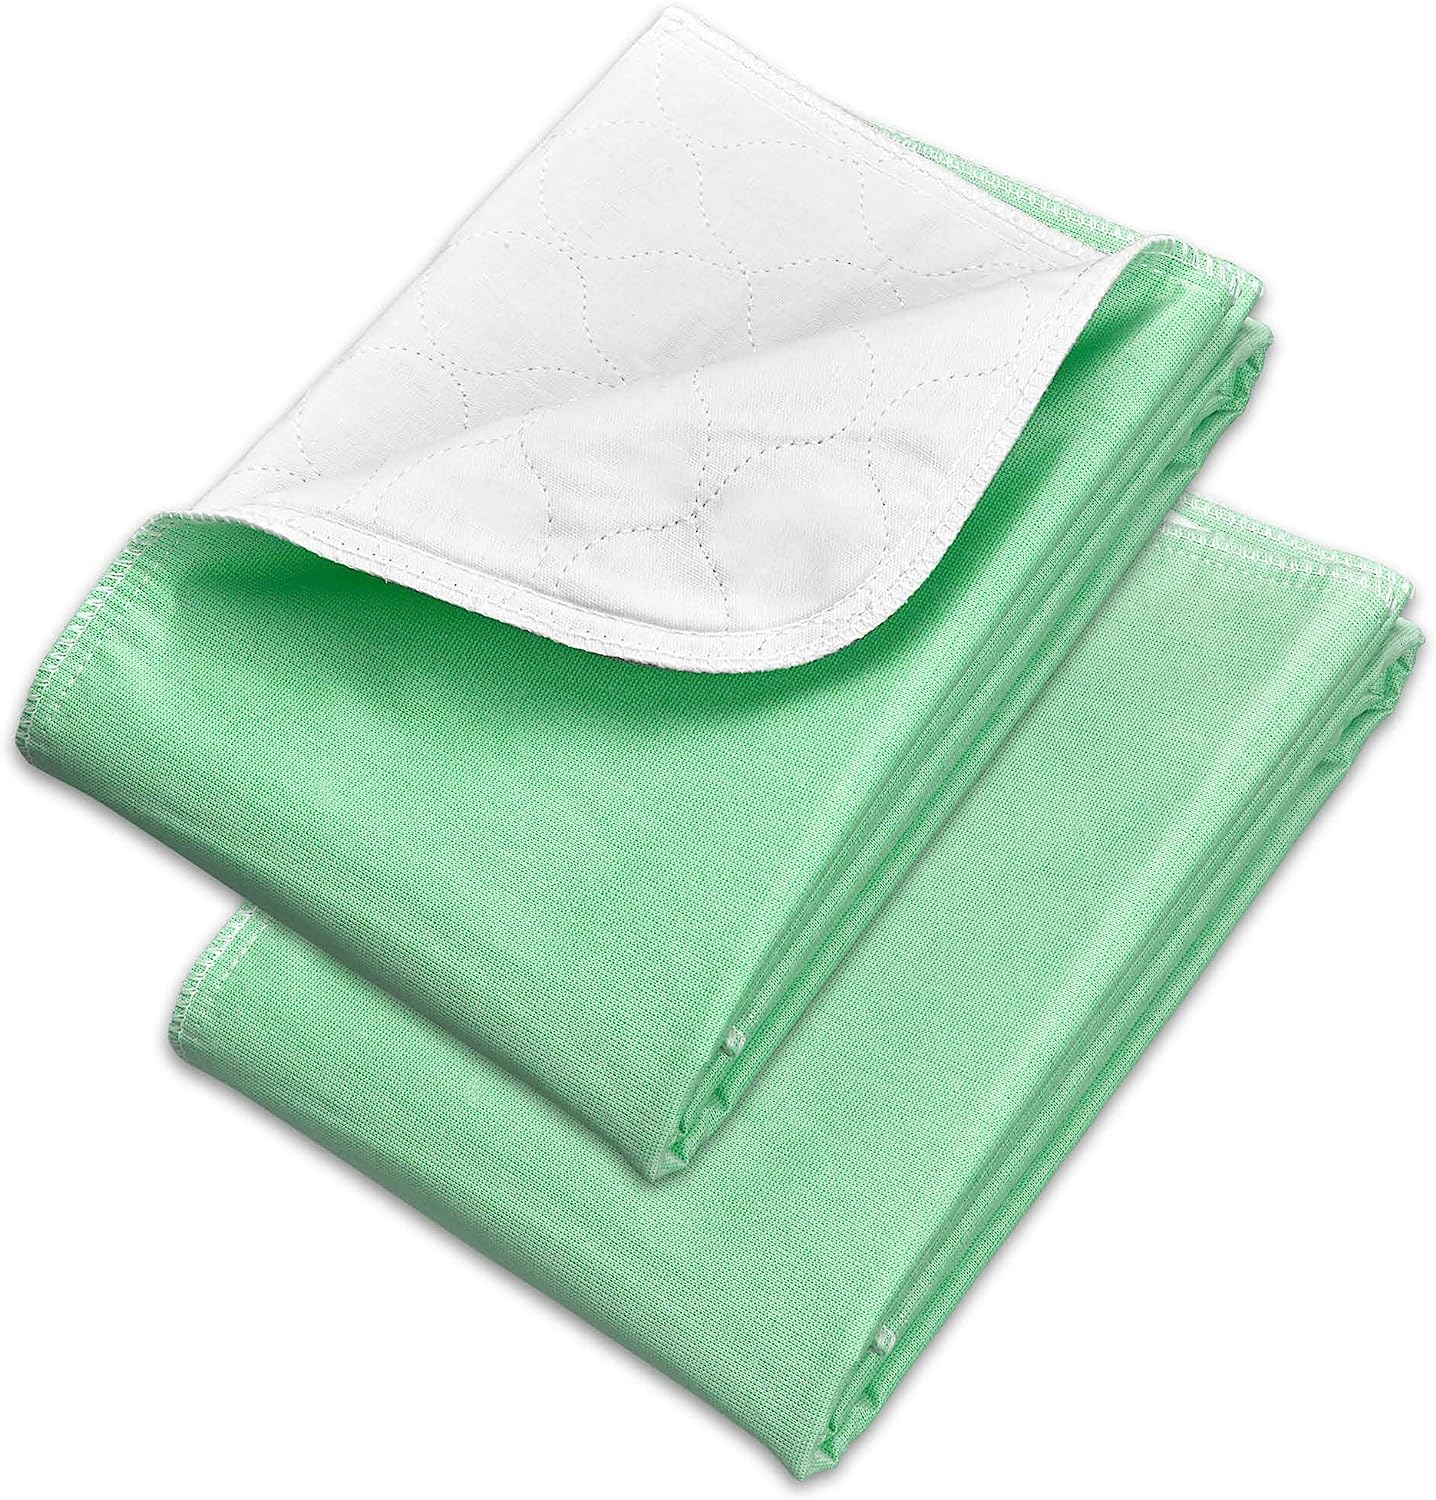 Incontinence Bed Pads, Reusable Waterproof Underpad Chair, Sofa and Mattress Protectors